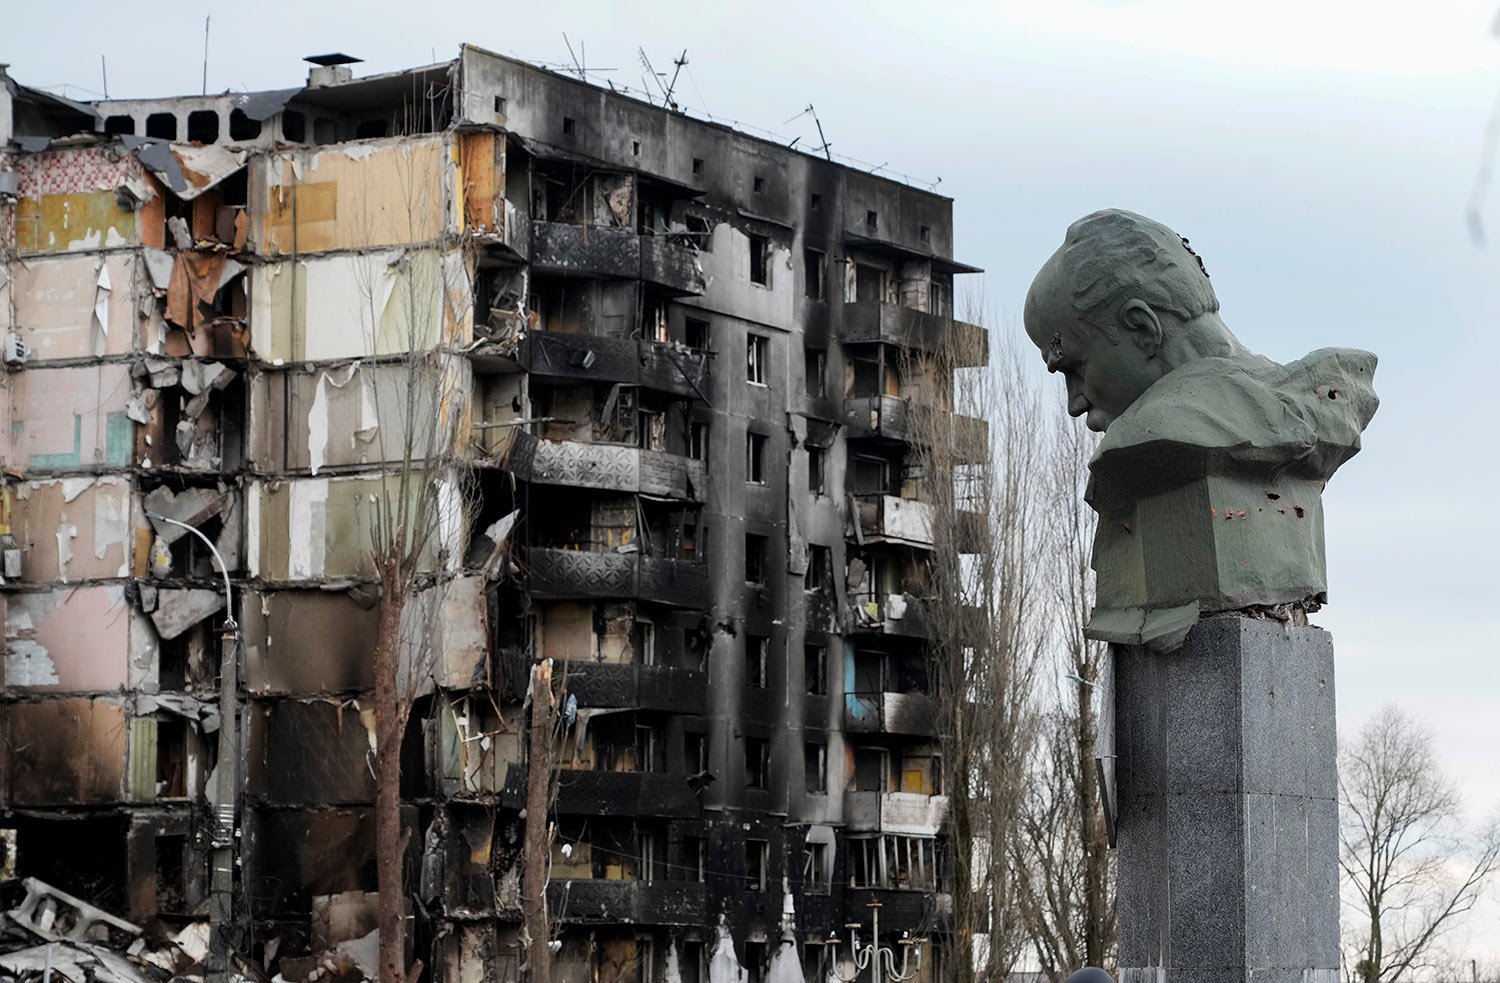  A monument to Taras Shevchenko, a Ukrainian poet and a national symbol, stands near an apartment ruined in the Russian shelling in the central square in Borodyanka, Ukraine, Wednesday, Apr. 6, 2022. (AP Photo/Efrem Lukatsky) 